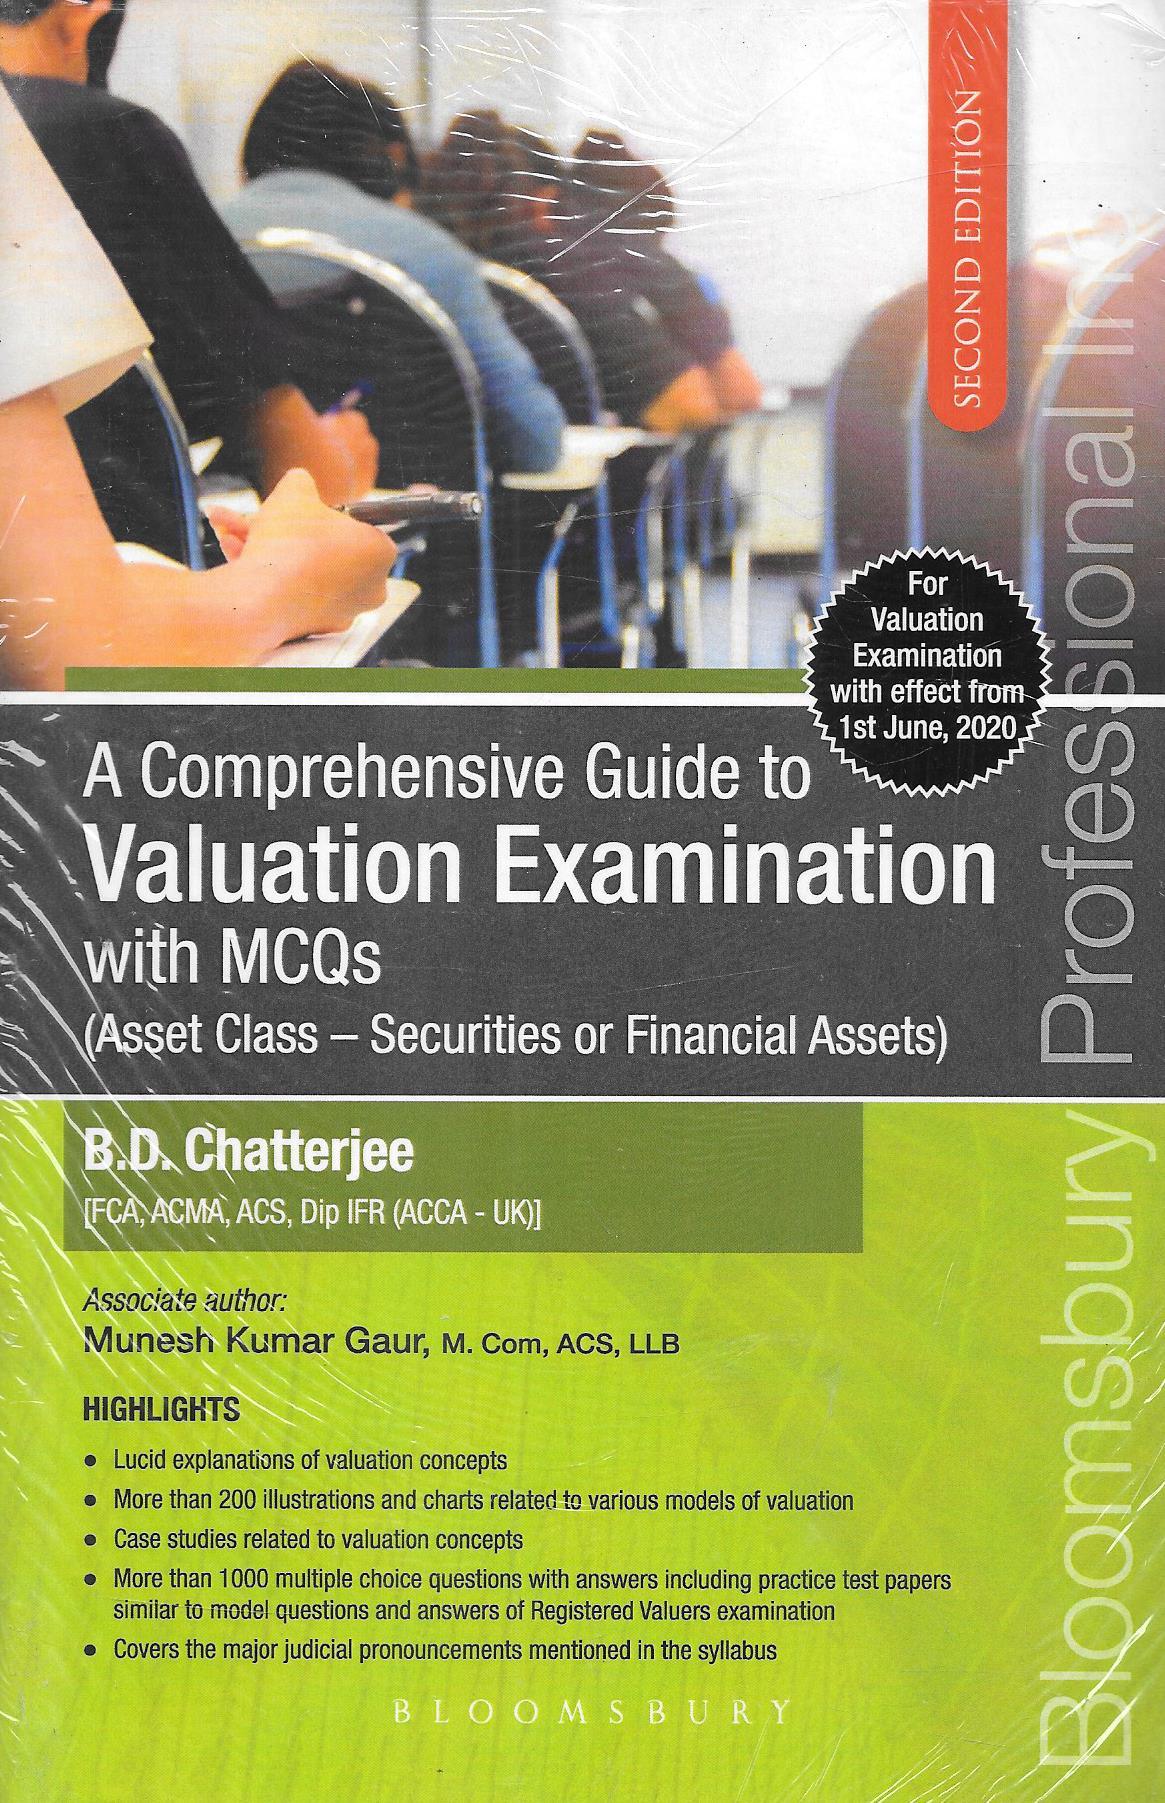 A Comprehensive Guide To Valuation Examination With Mcqs (Asset Class-Securities Or Financial Assets)